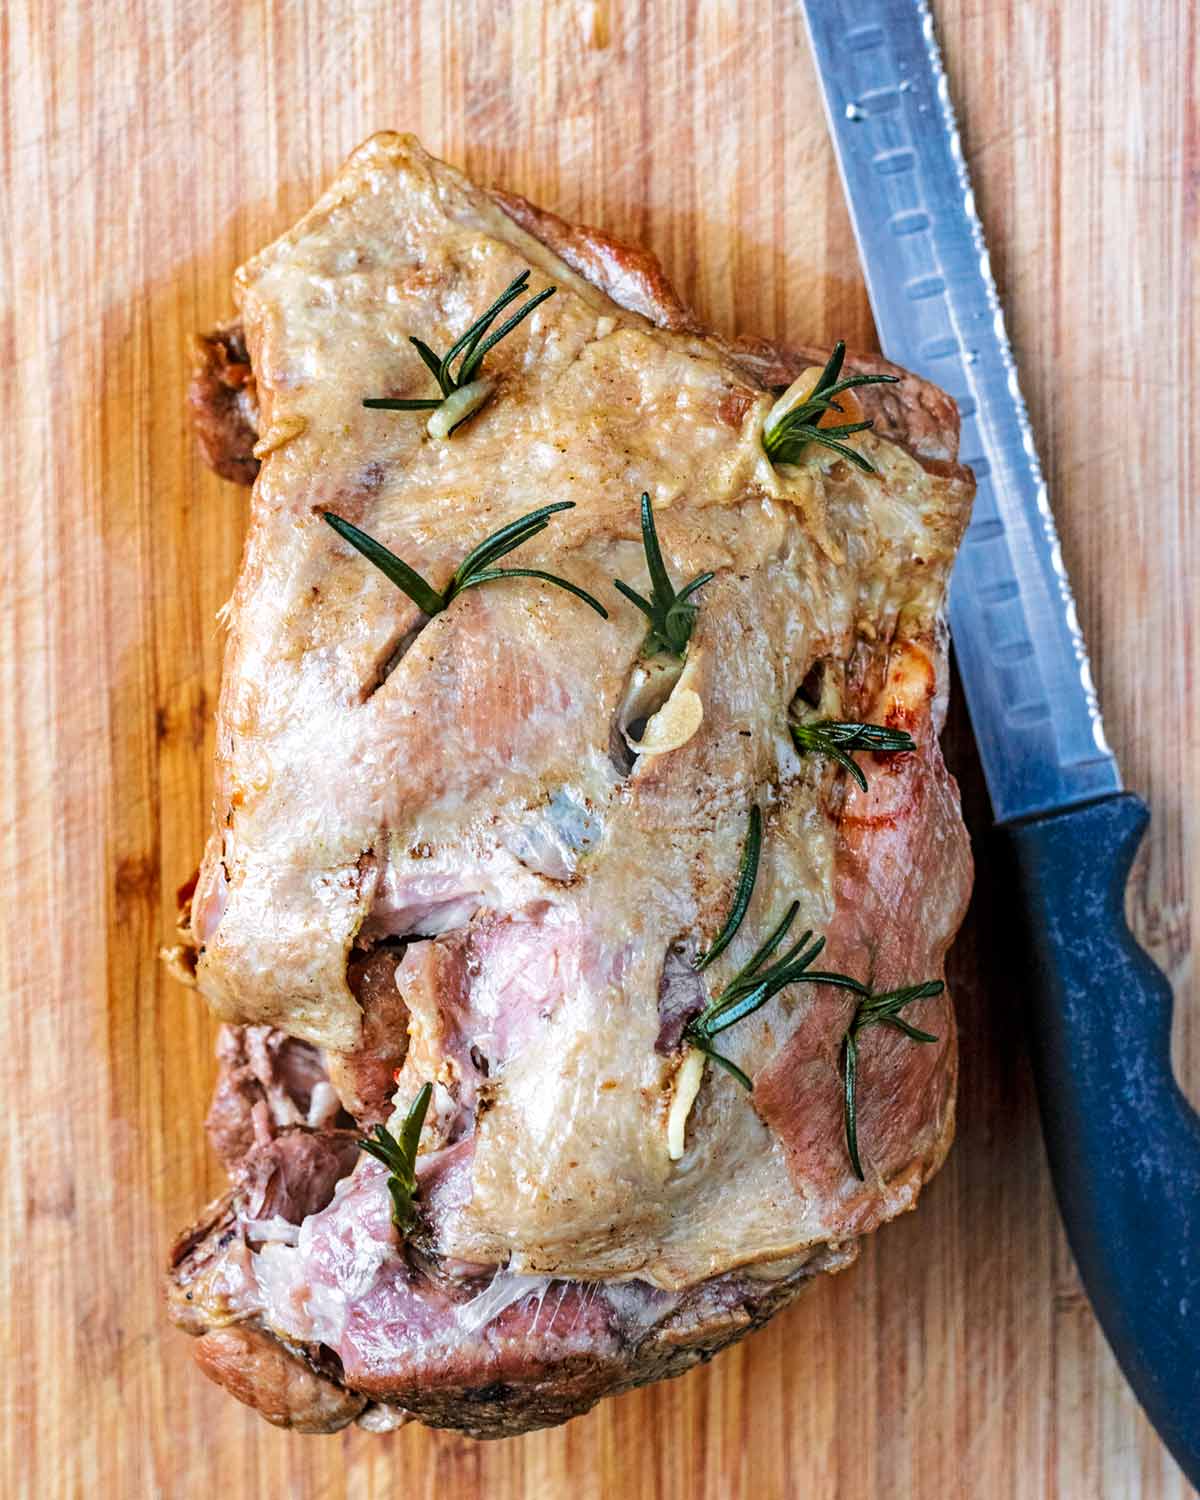 Cooked lamb shoulder on a chopping board with a carving knife.